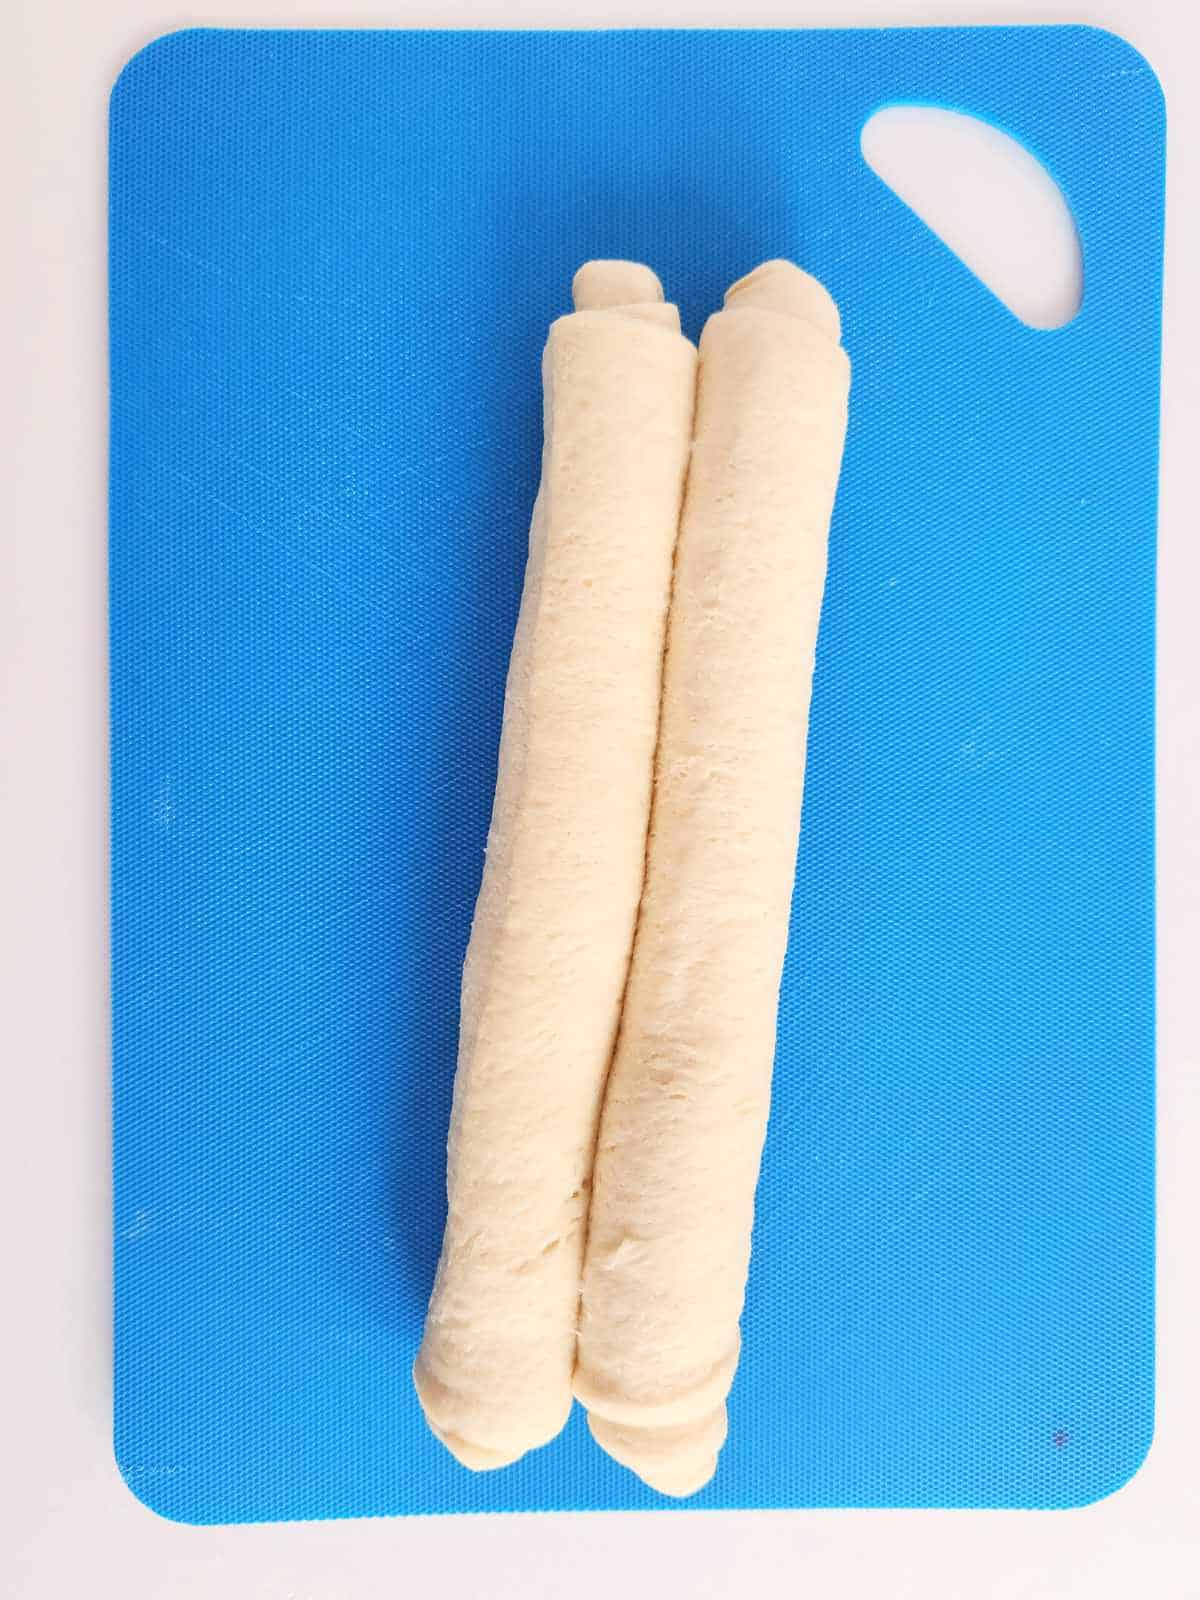 dough rolled up to the center from both ends.